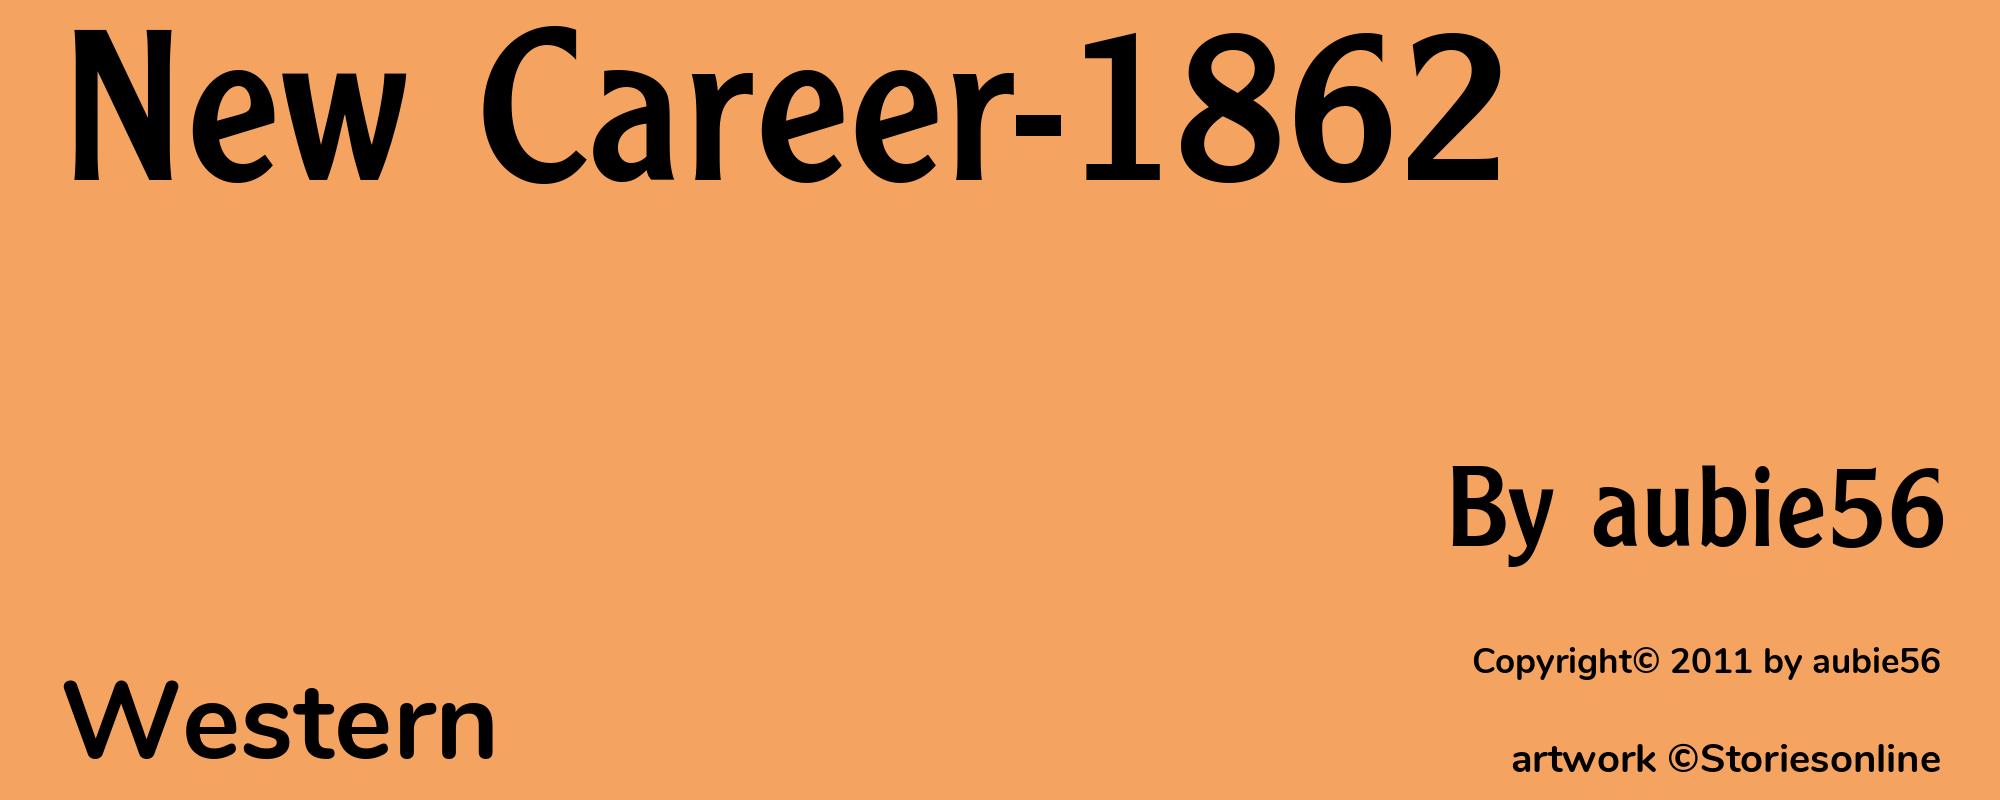 New Career-1862 - Cover